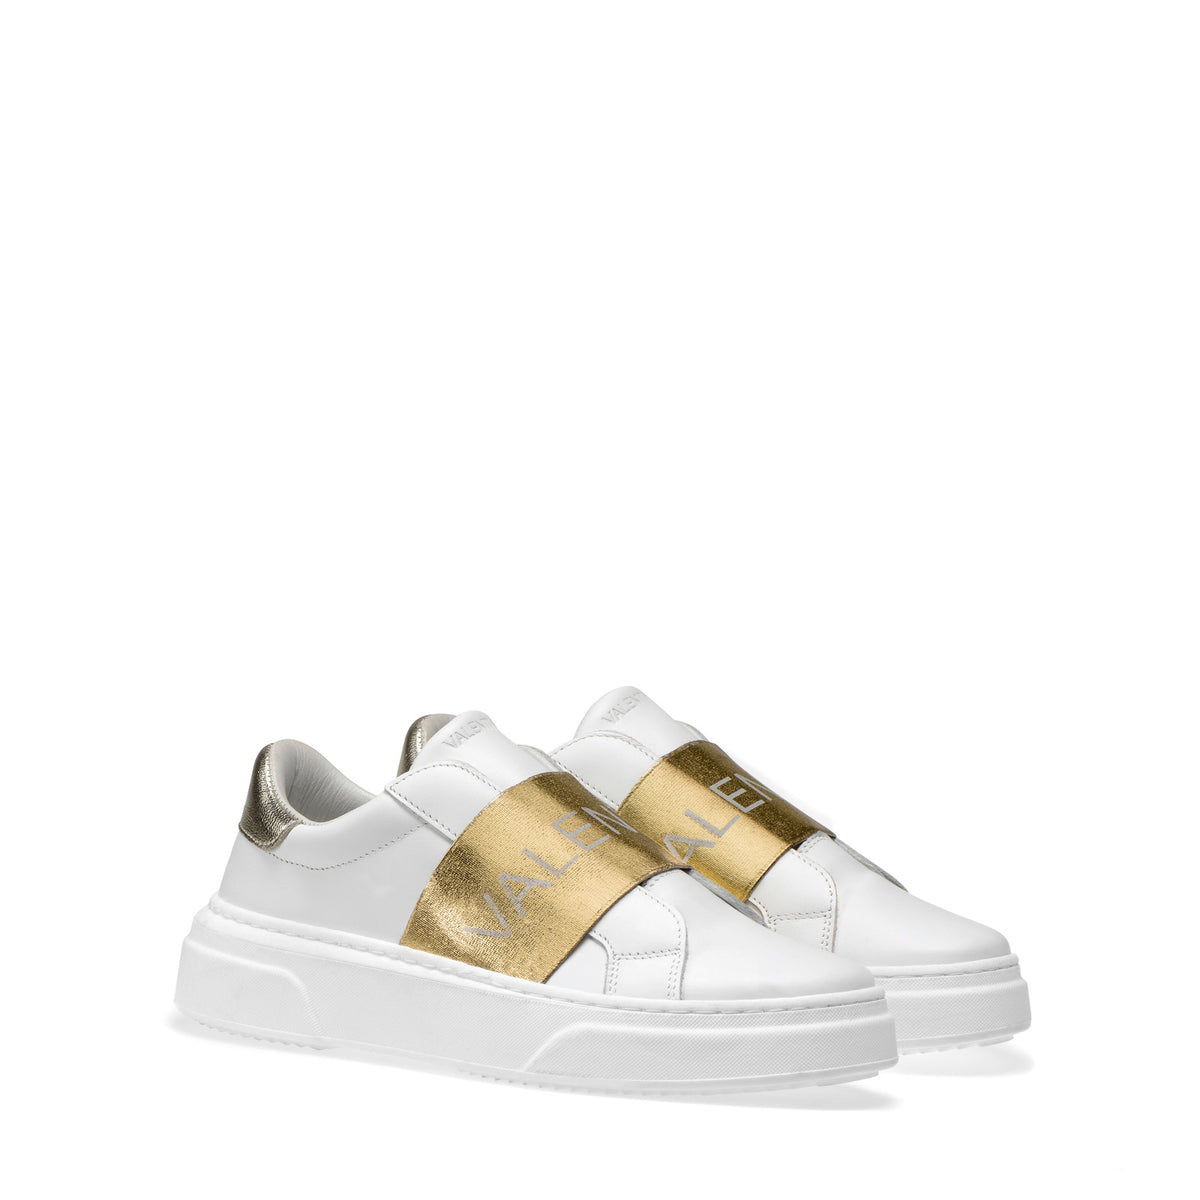 Plicht Staat Gespecificeerd Valentino Sneakers Slip-On for Women in White Leather and Gold Detail – Valentino  Shoes